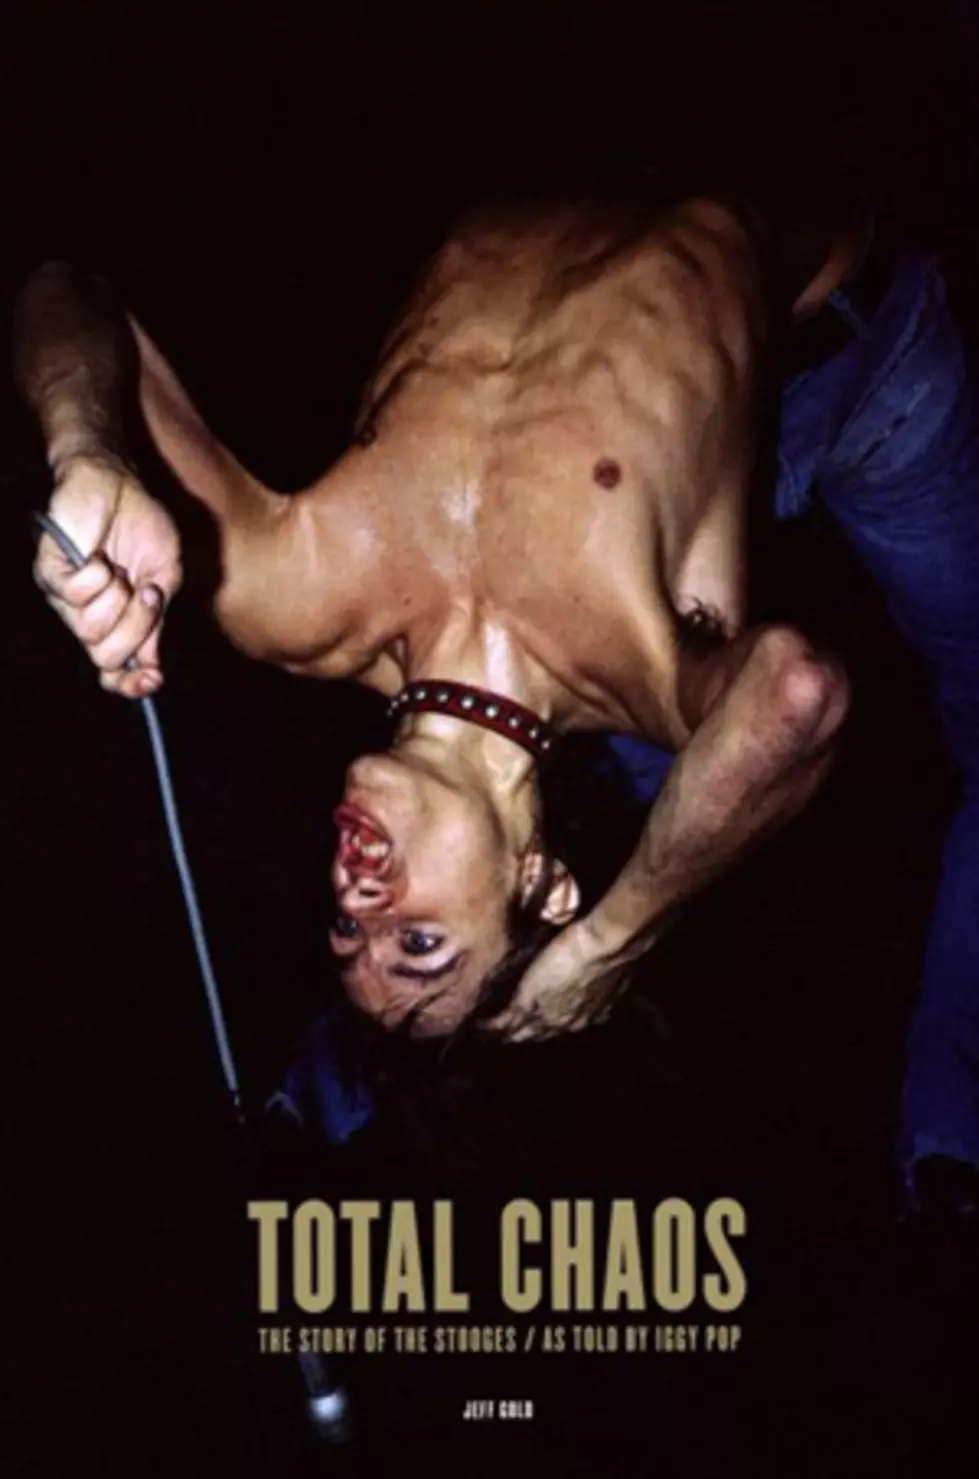 Iggy Pop Tells Stooges Story in New Book